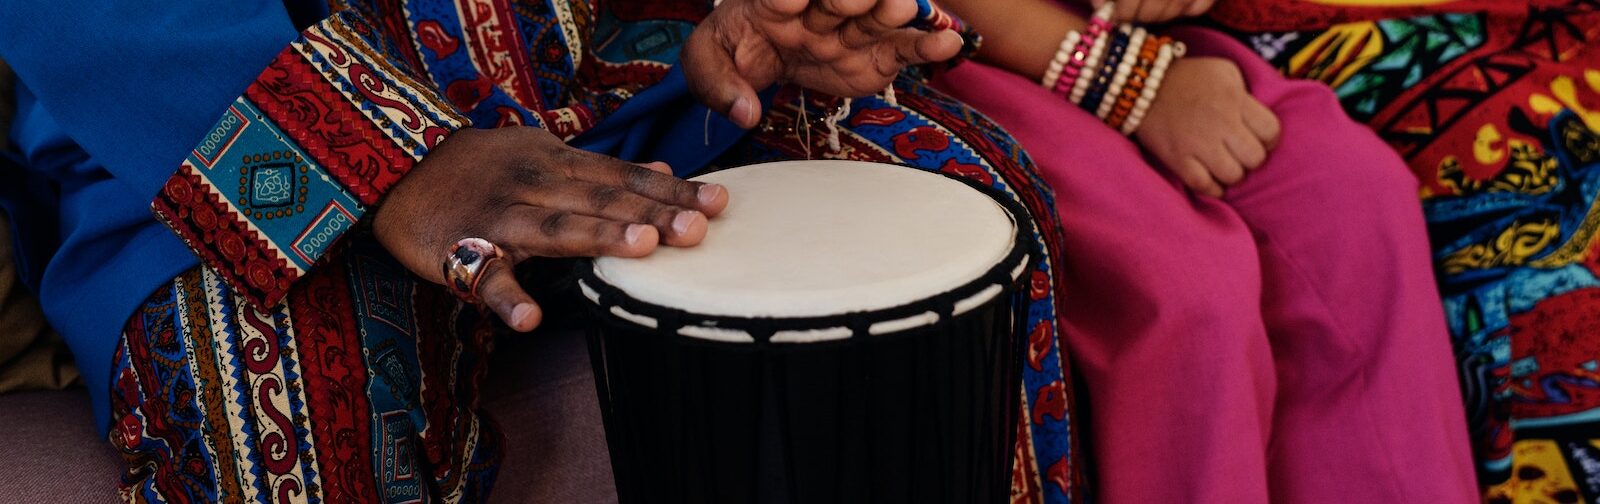 Photo Of Person Playing Djembe